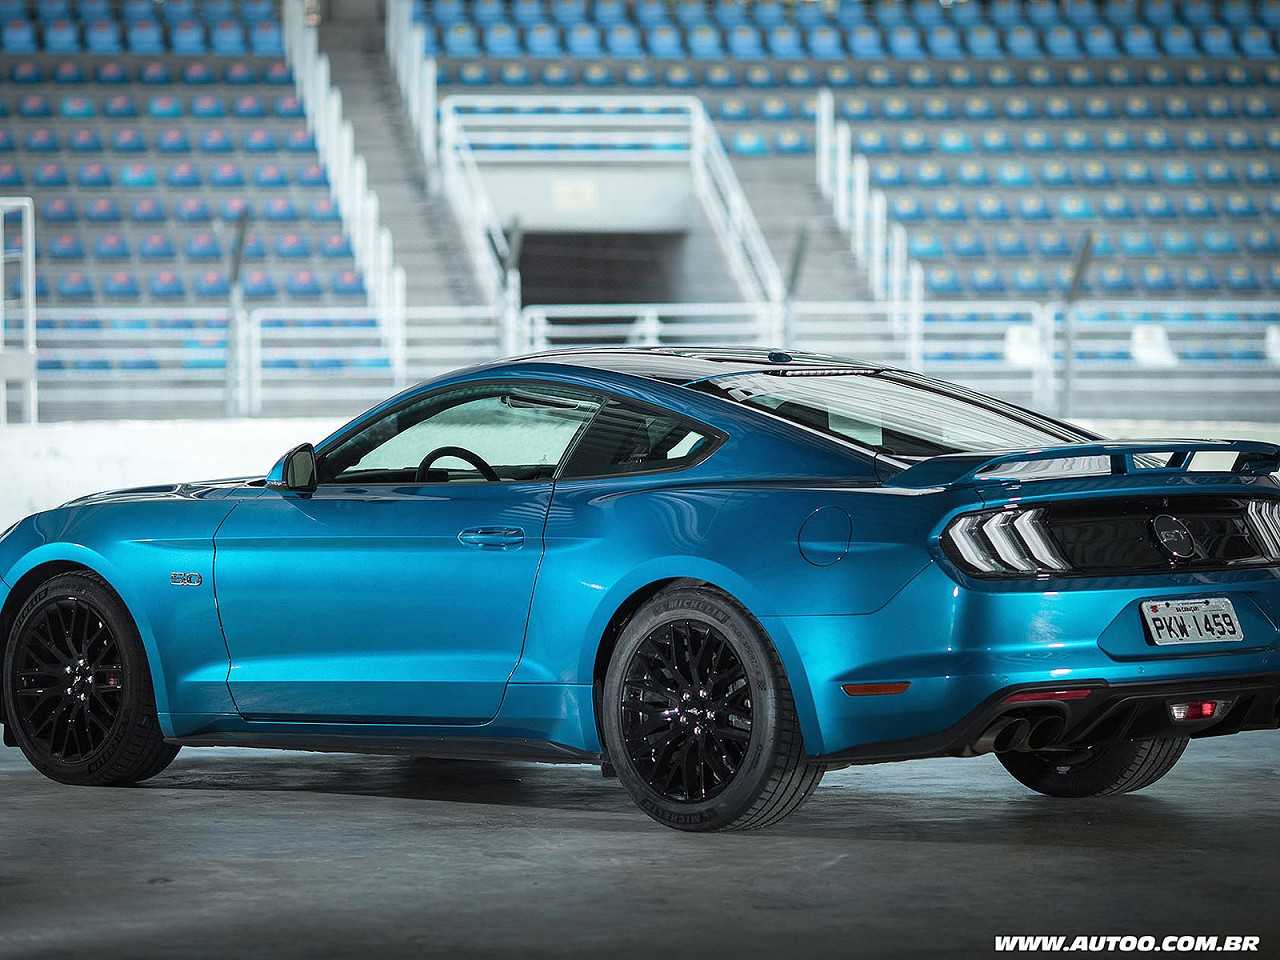 FordMustang 2019 - outros